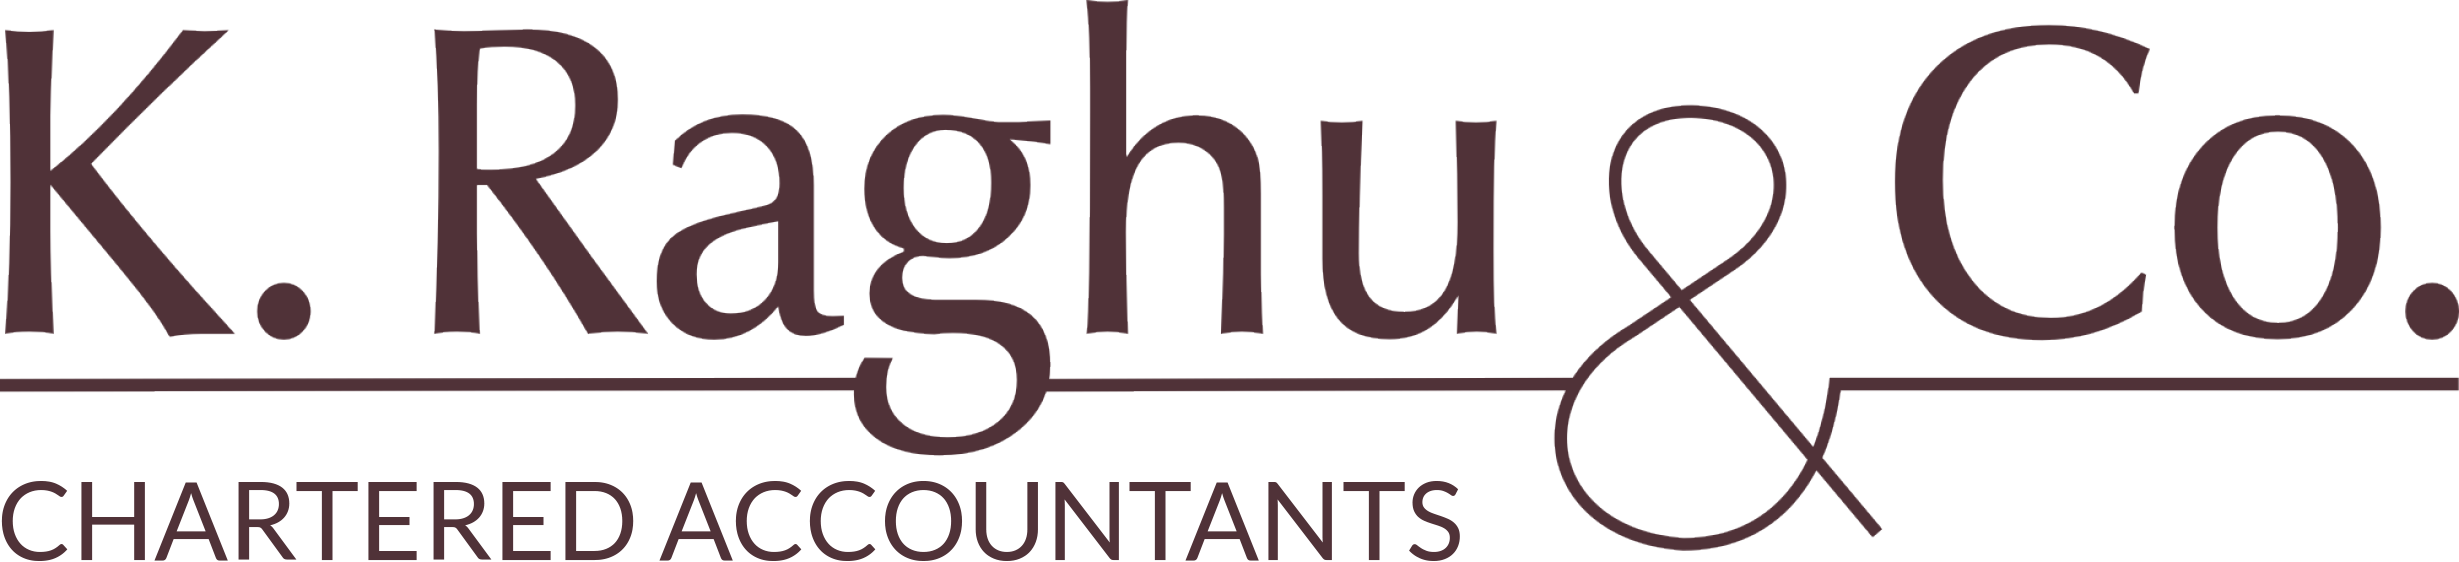 K. Raghu & Co - Chartered Accountants|Accounting Services|Professional Services